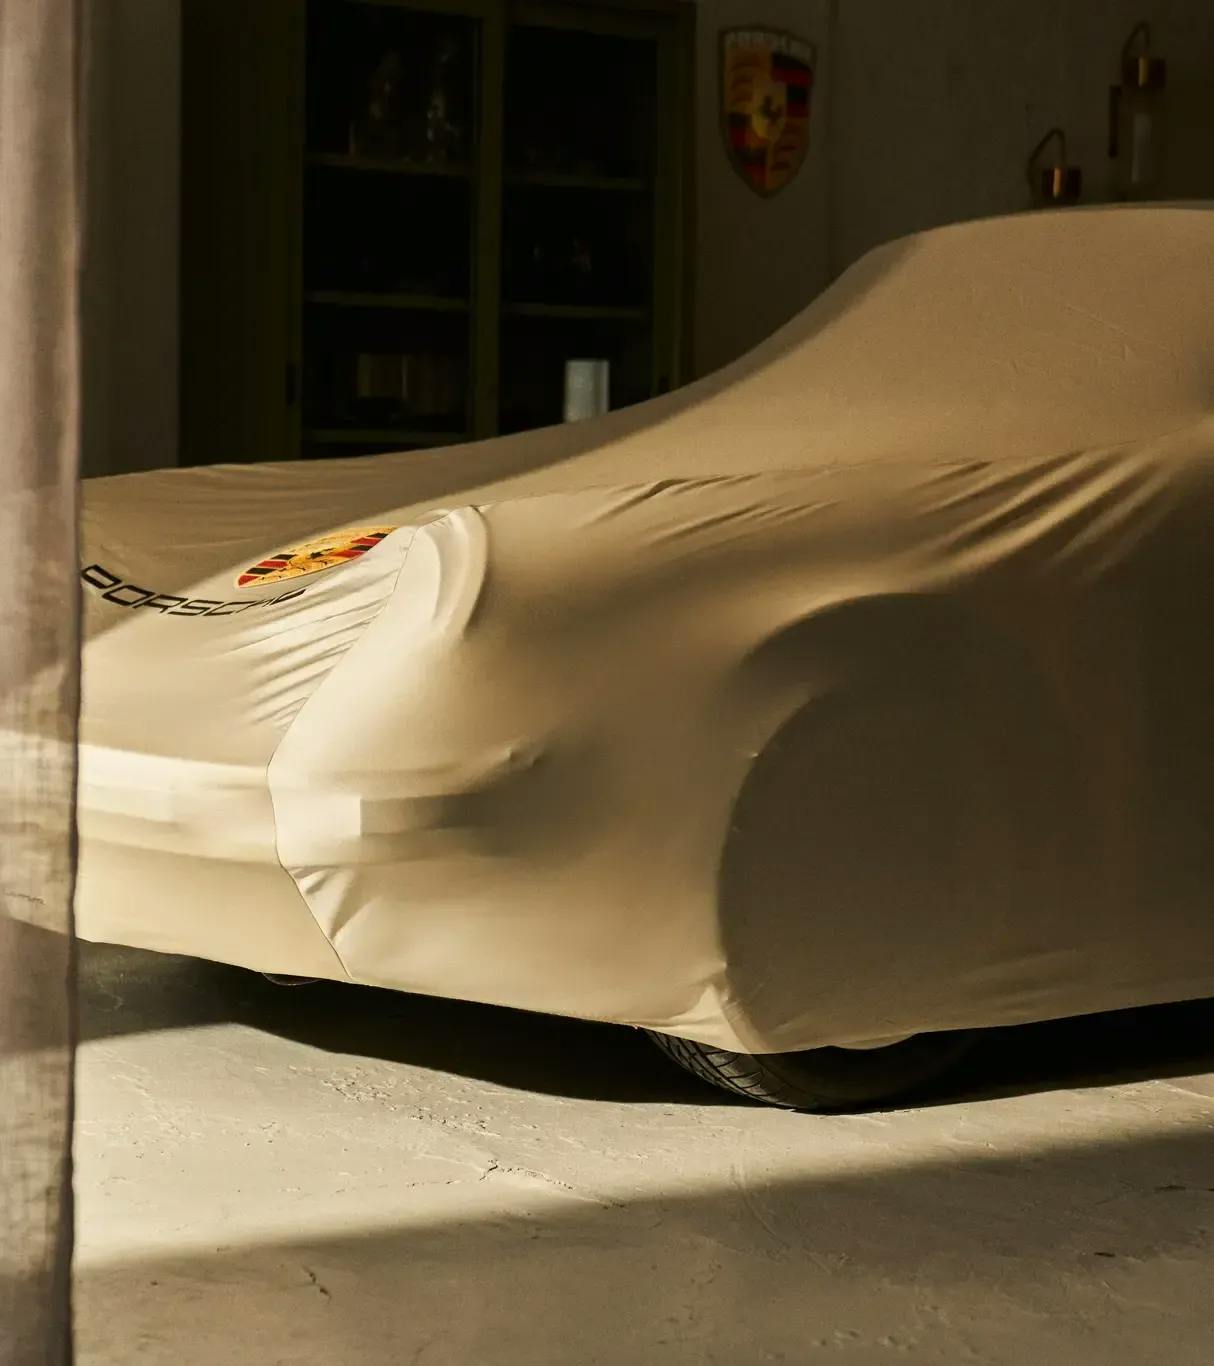 Car cover for Porsche 911, 912 and 964 without spoiler and with